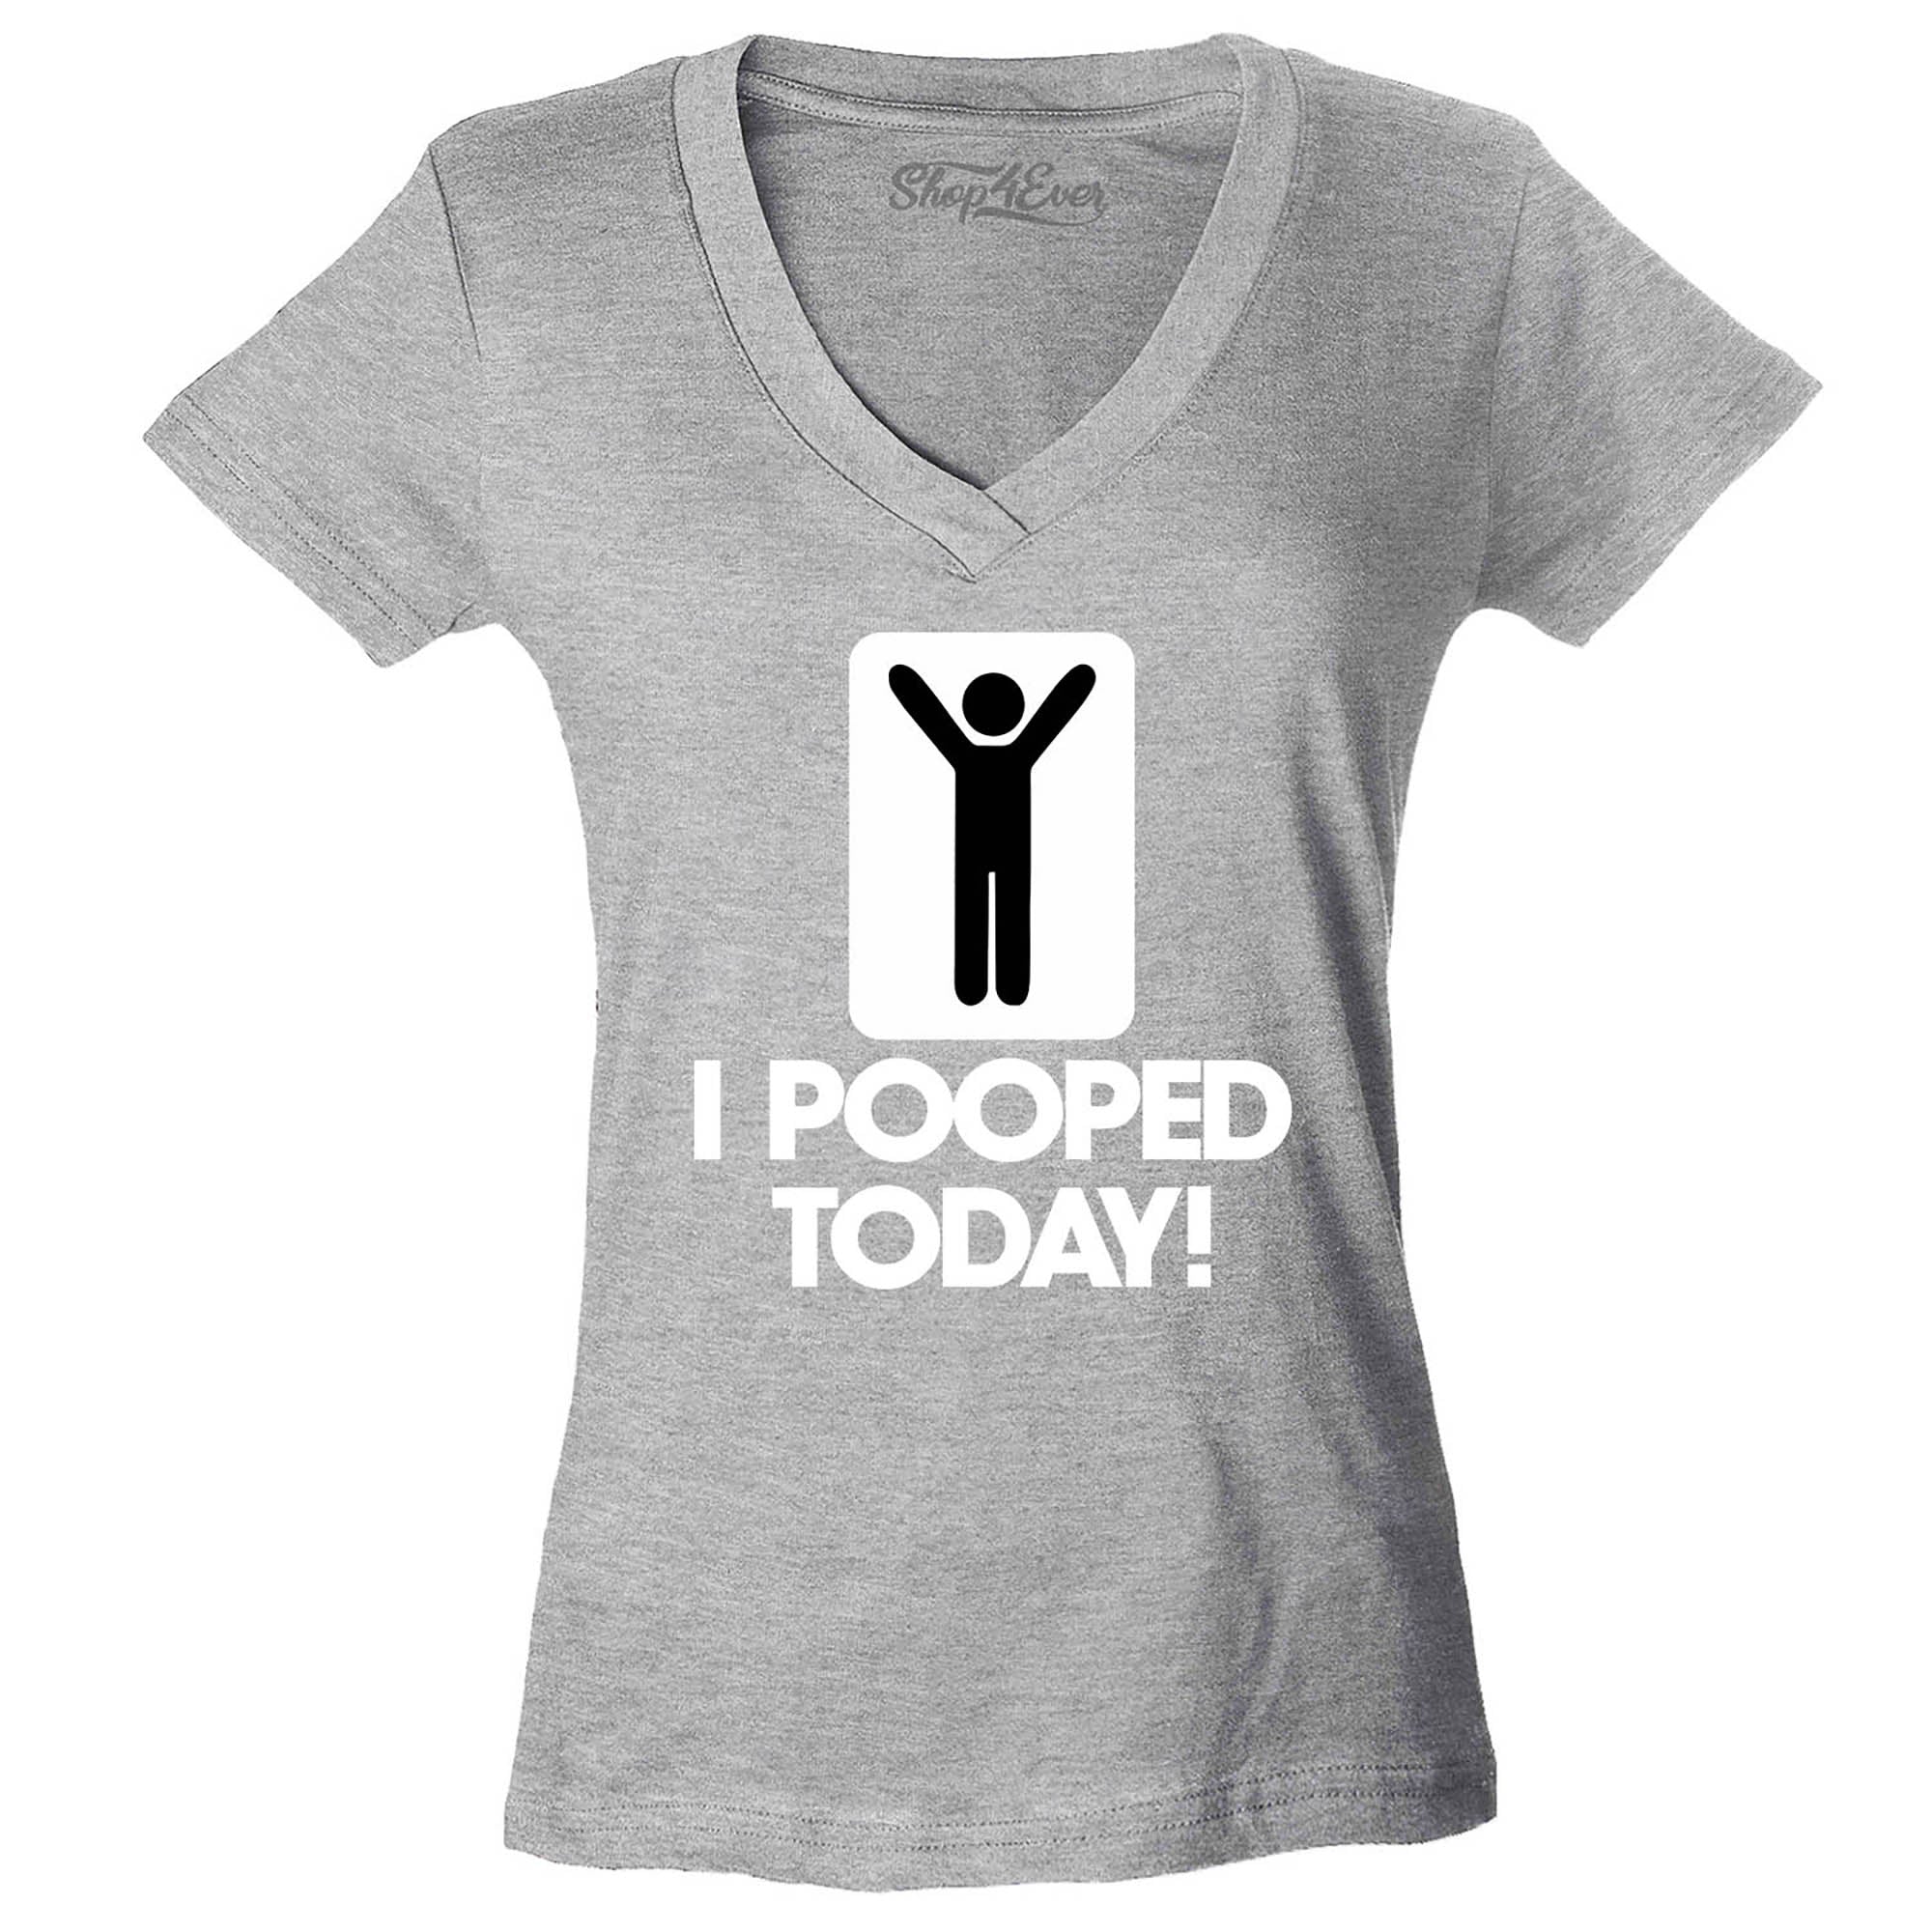 I Pooped Today Women's V-Neck T-Shirt Funny Shirts Slim FIT